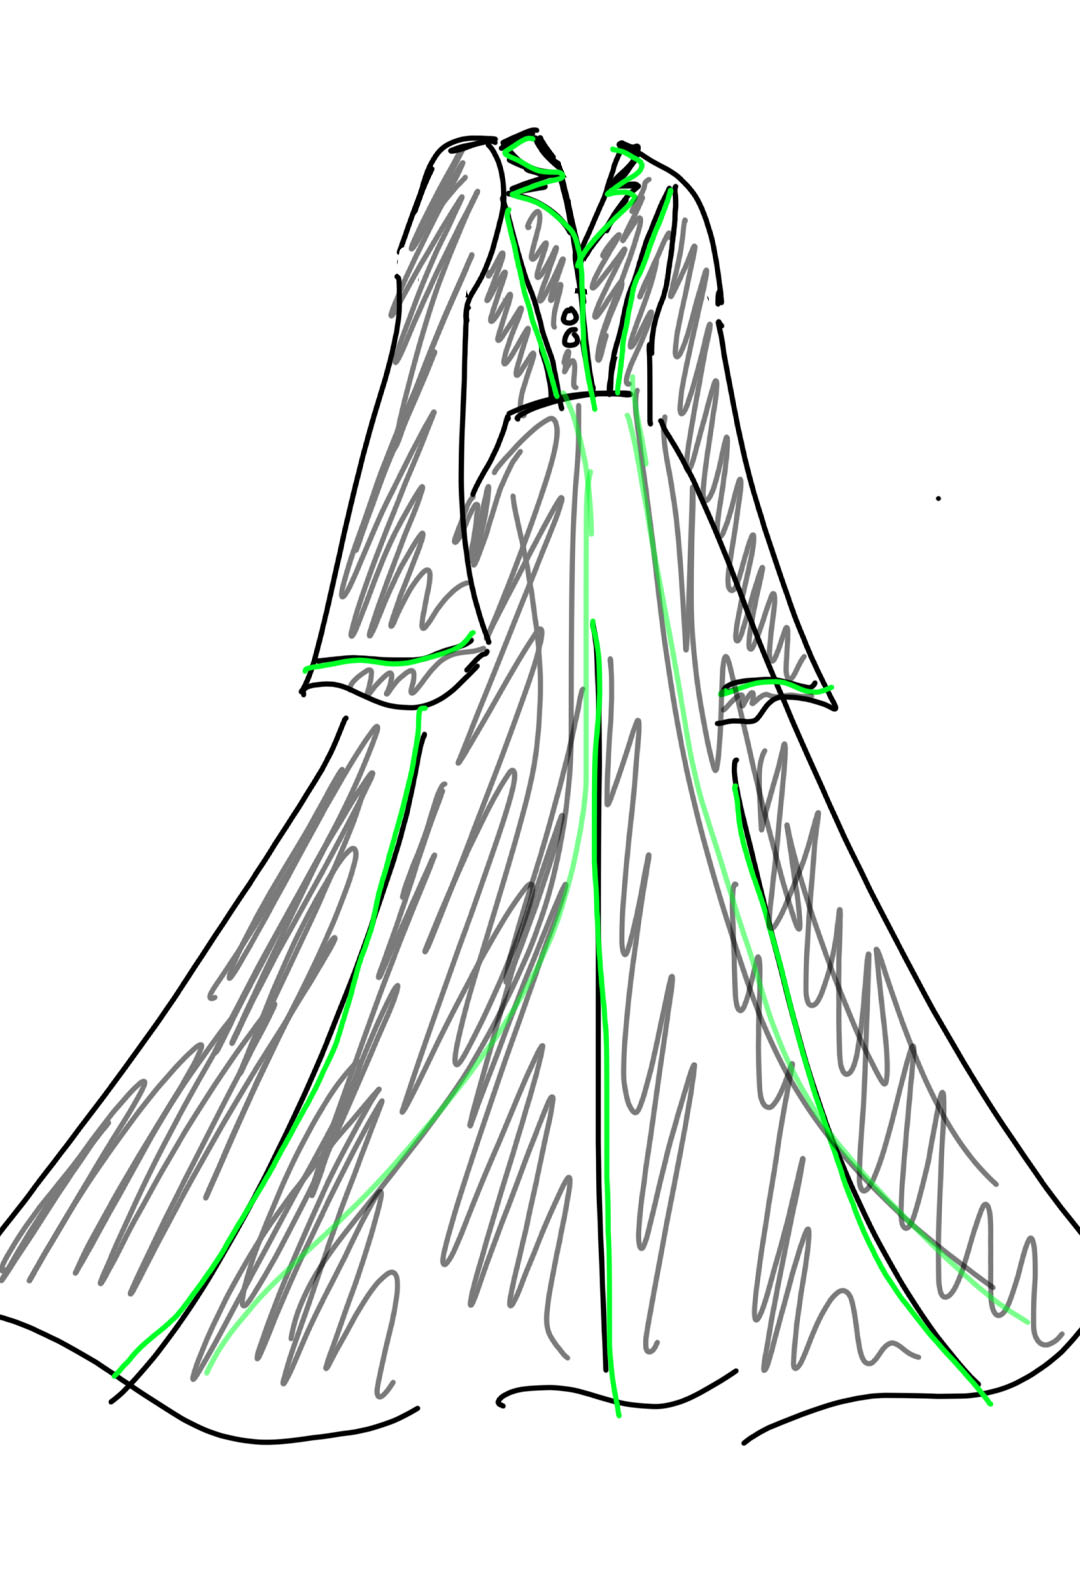 A photoshop sketch of a translucent black robe with green piping. 